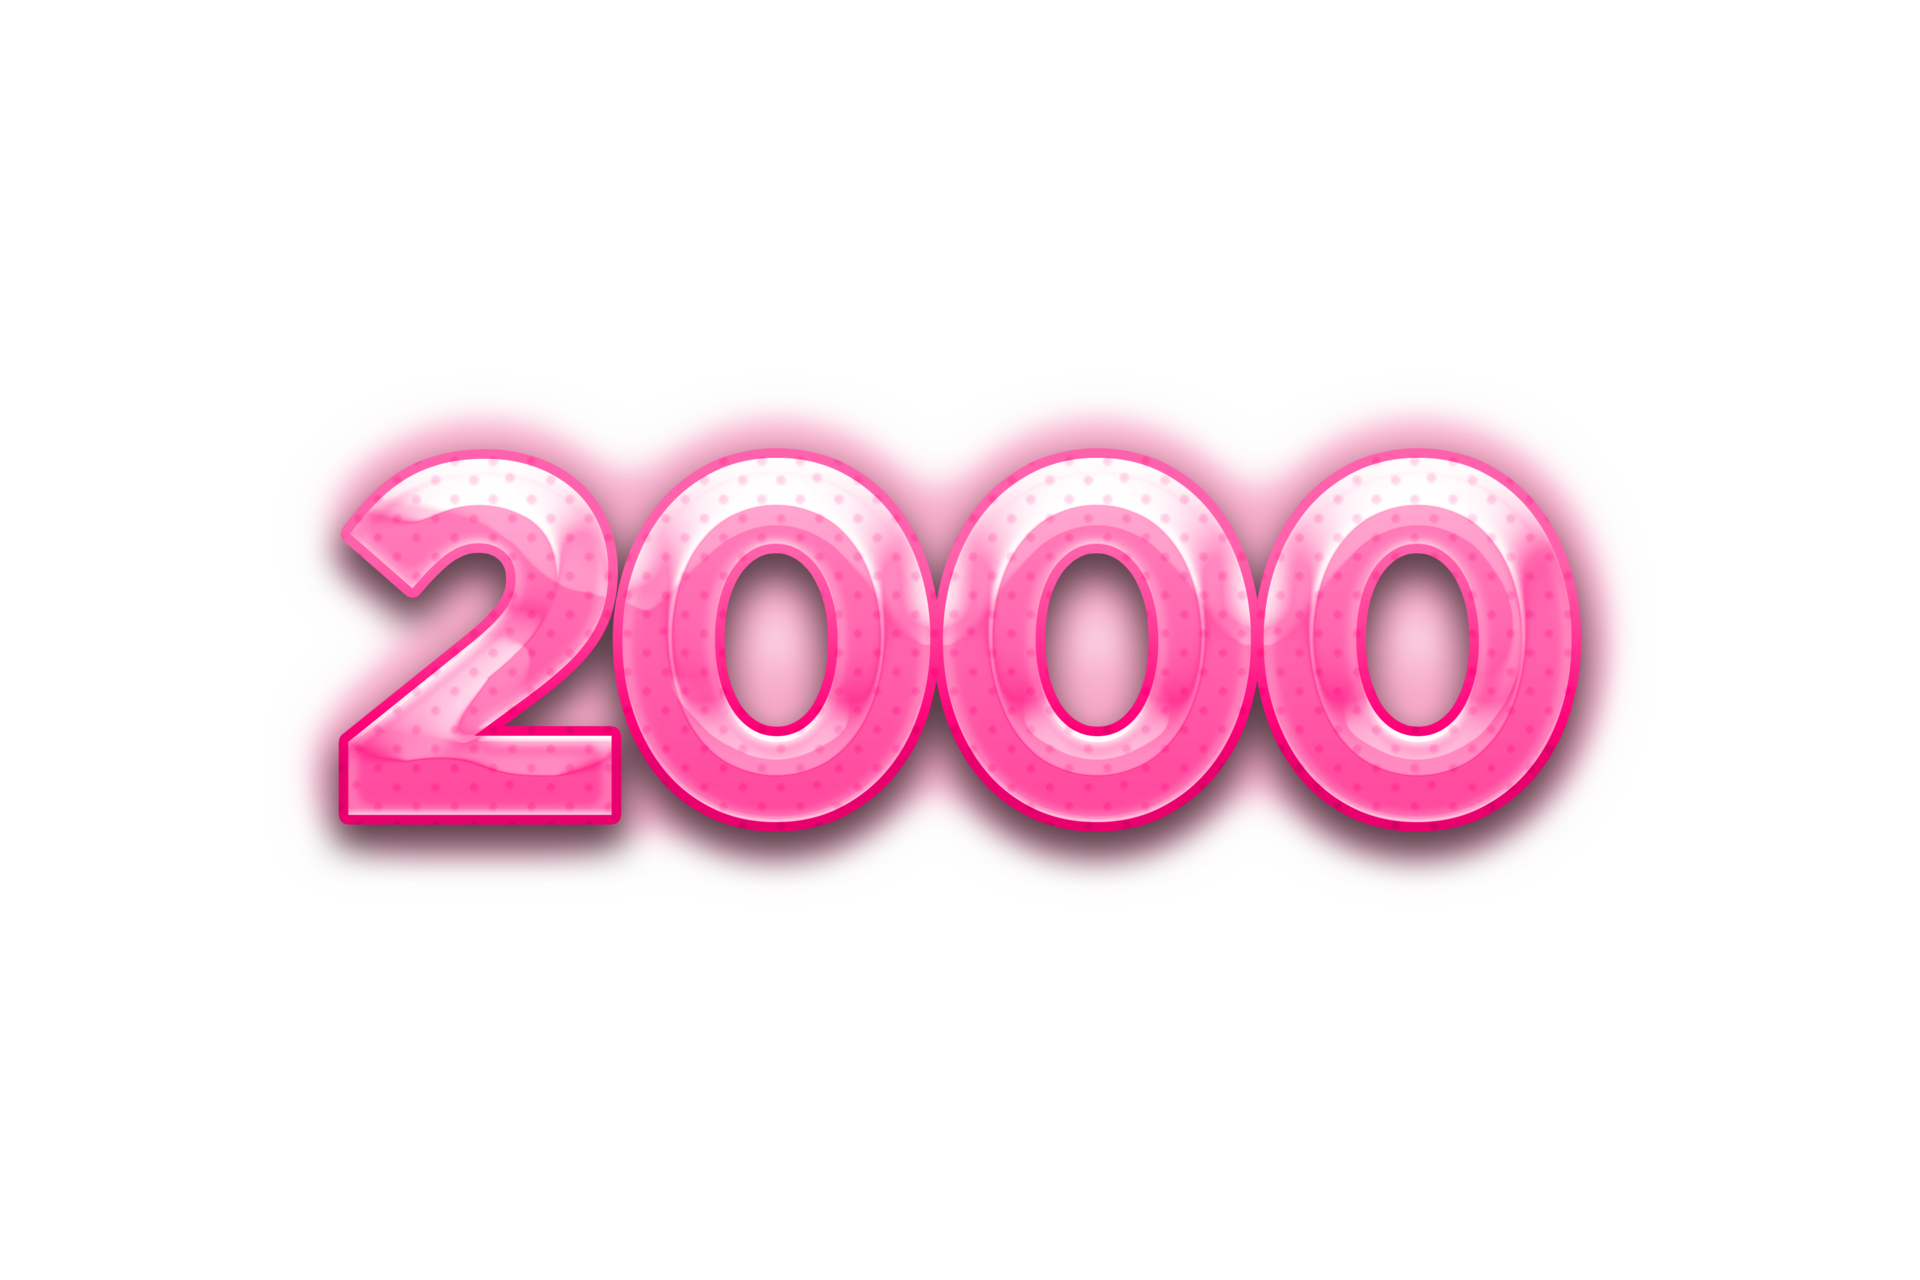 2000 subscribers celebration greeting Number with pink design